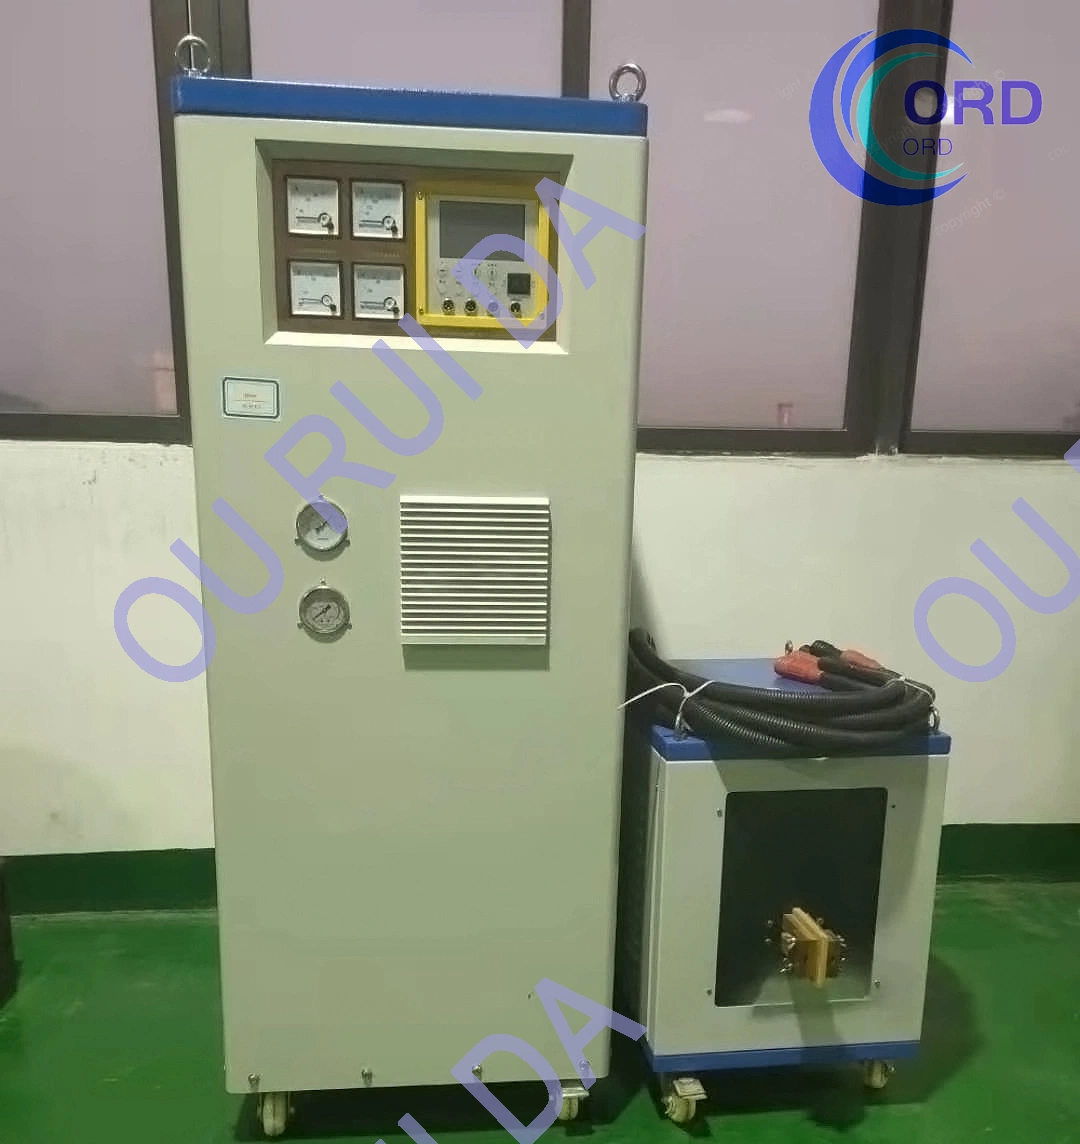 China Supplier Induction Heating Machine for Hot Forging/ Quenching /Annealing /Heating / Melting with The Metals Bar/Pipe / Billet (DSP-160KW)